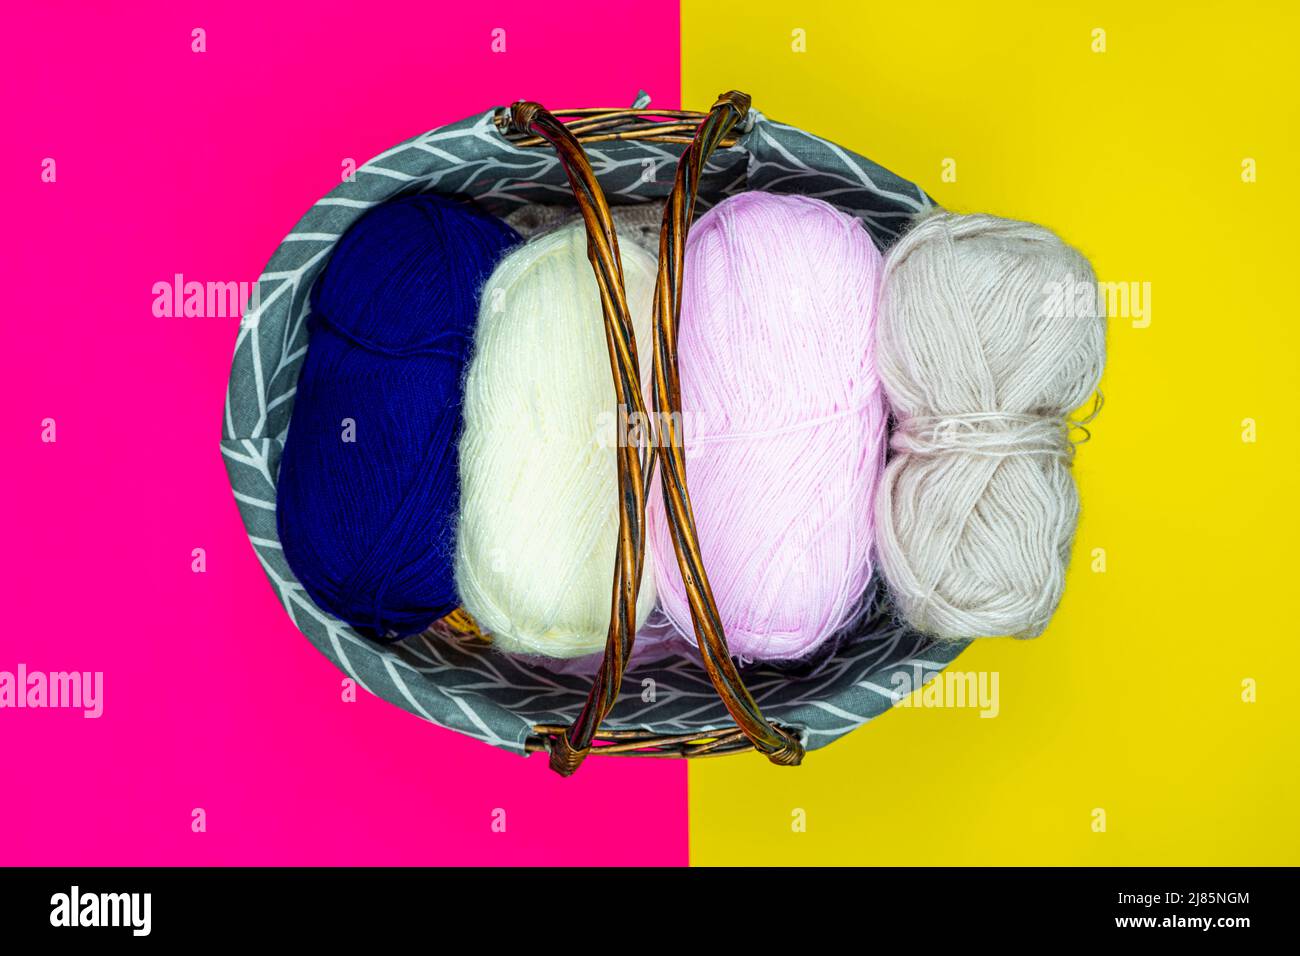 Colorful knitting threads in a wooden basket, top view, pink and yellow background, hand knitting supplies Stock Photo